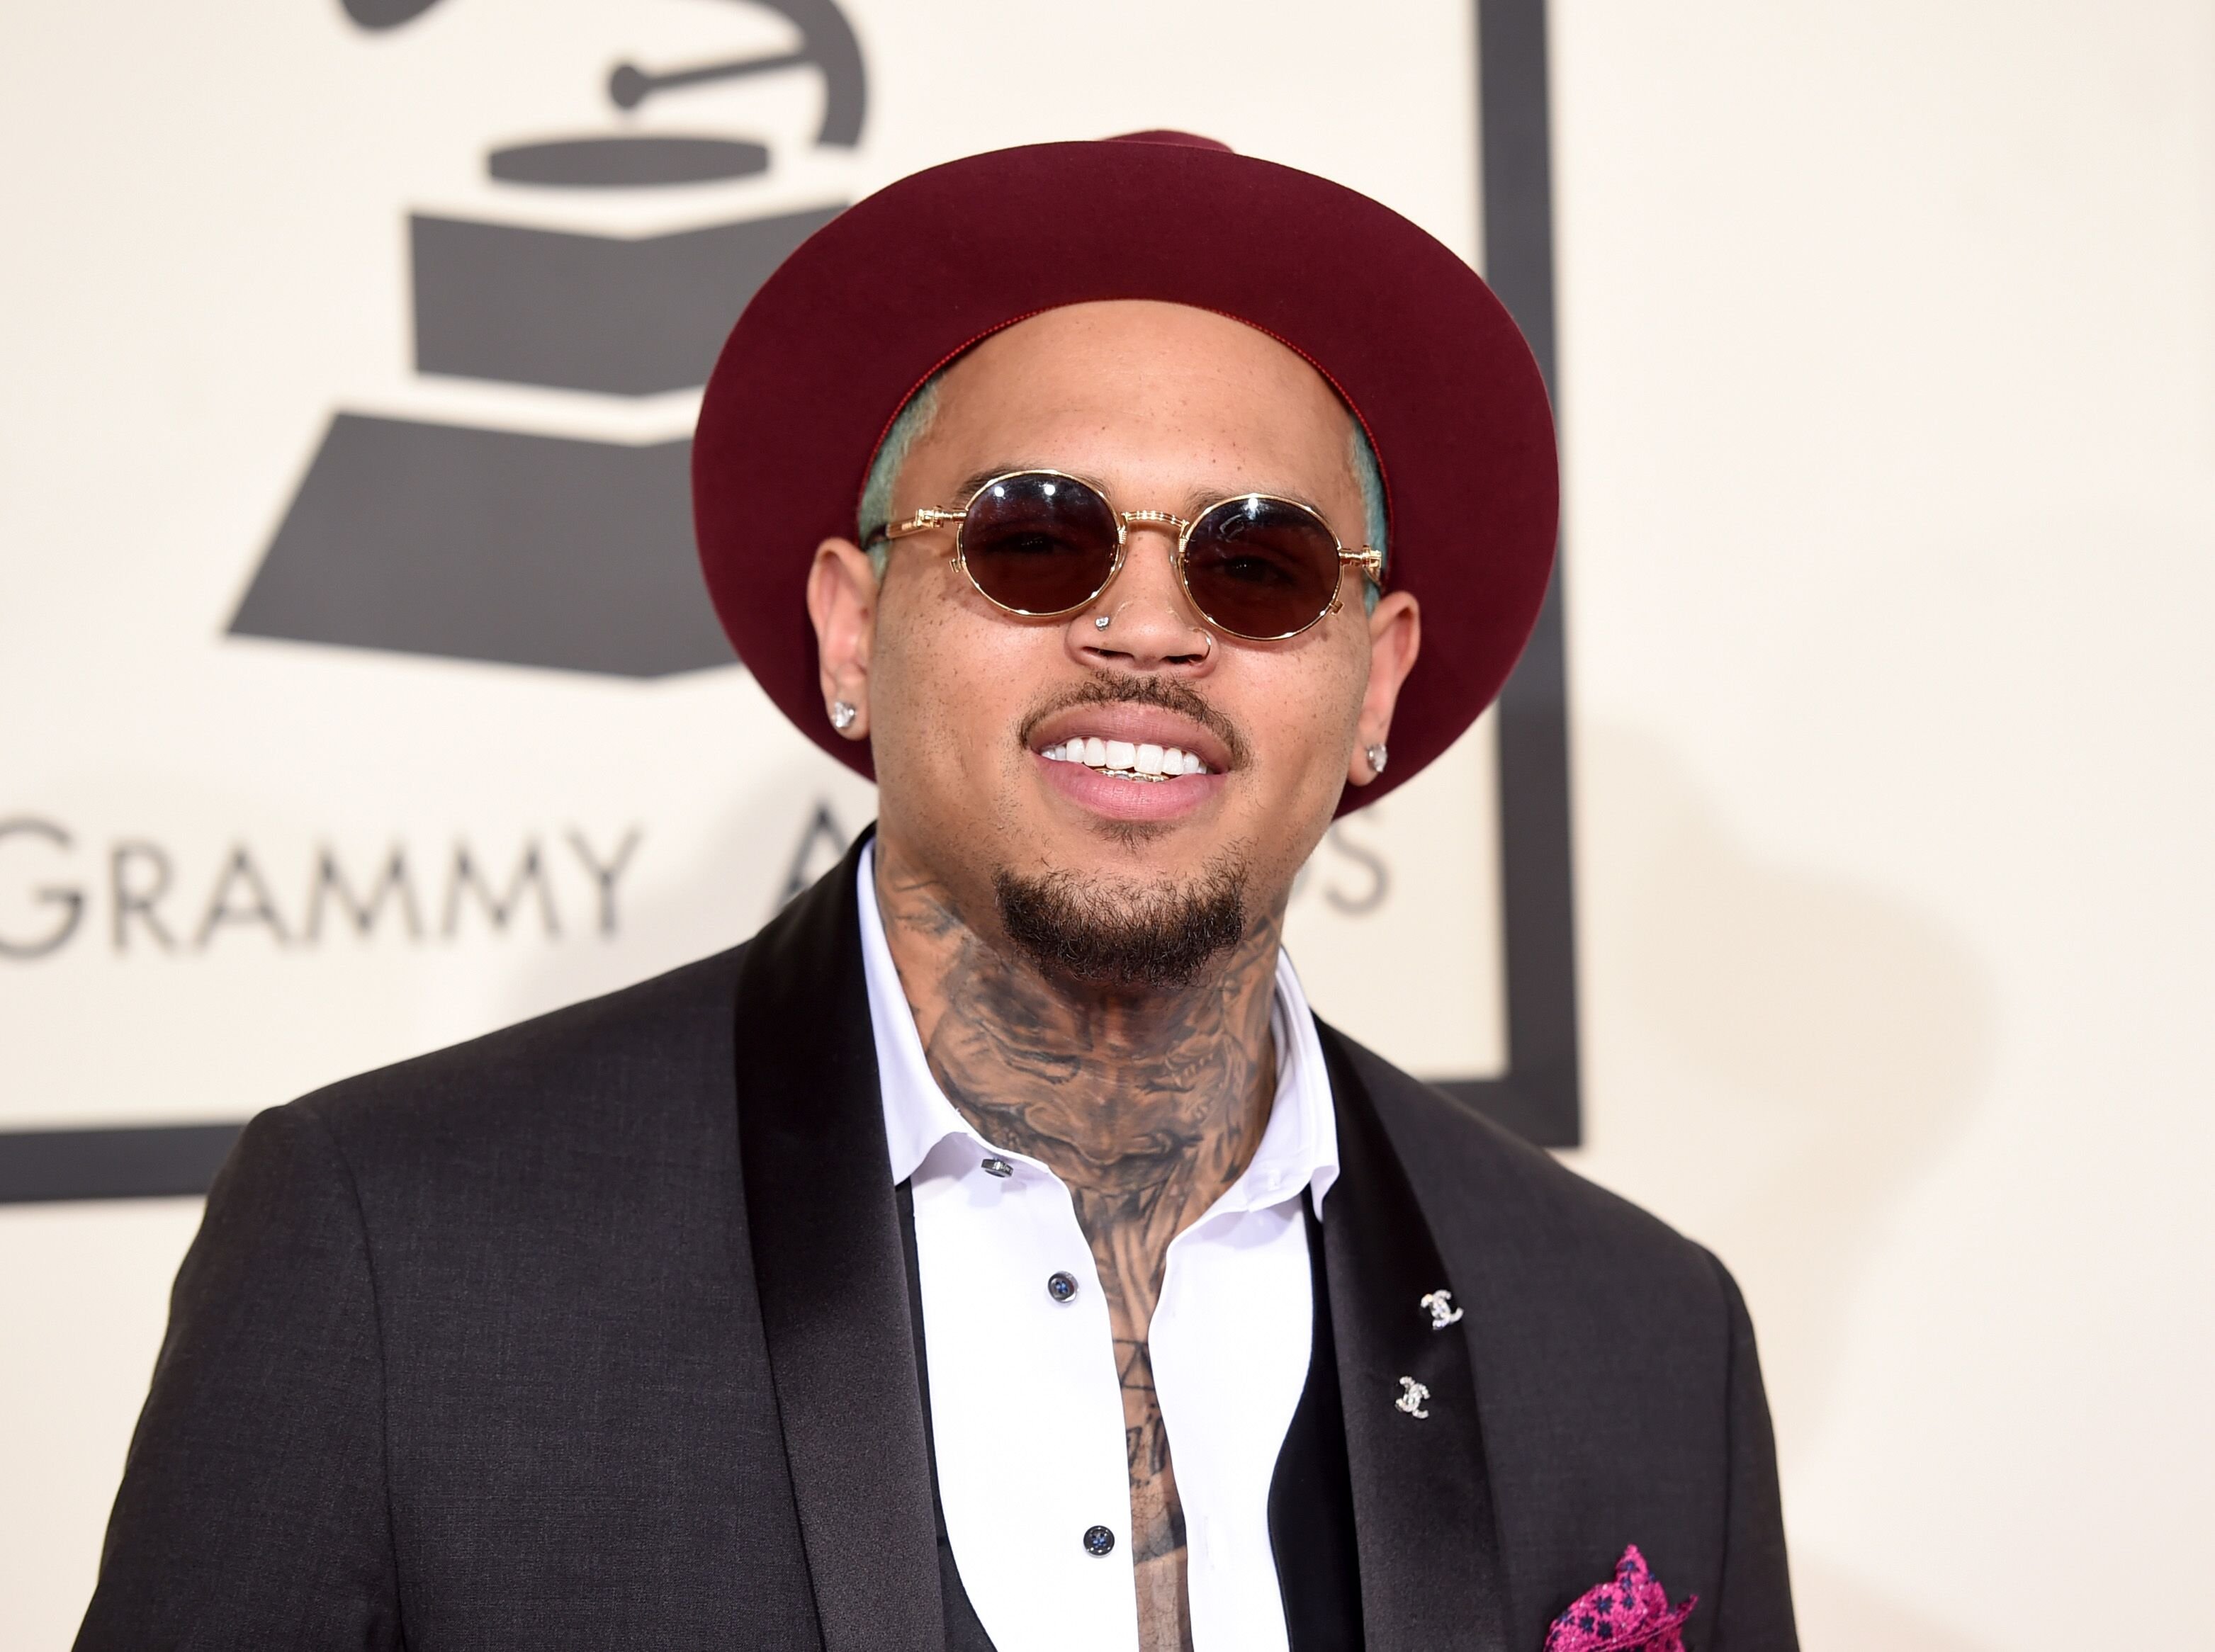 Singer Chris Brown at The 57th Annual GRAMMY Awards held at the Staples Center | Source: Getty Images